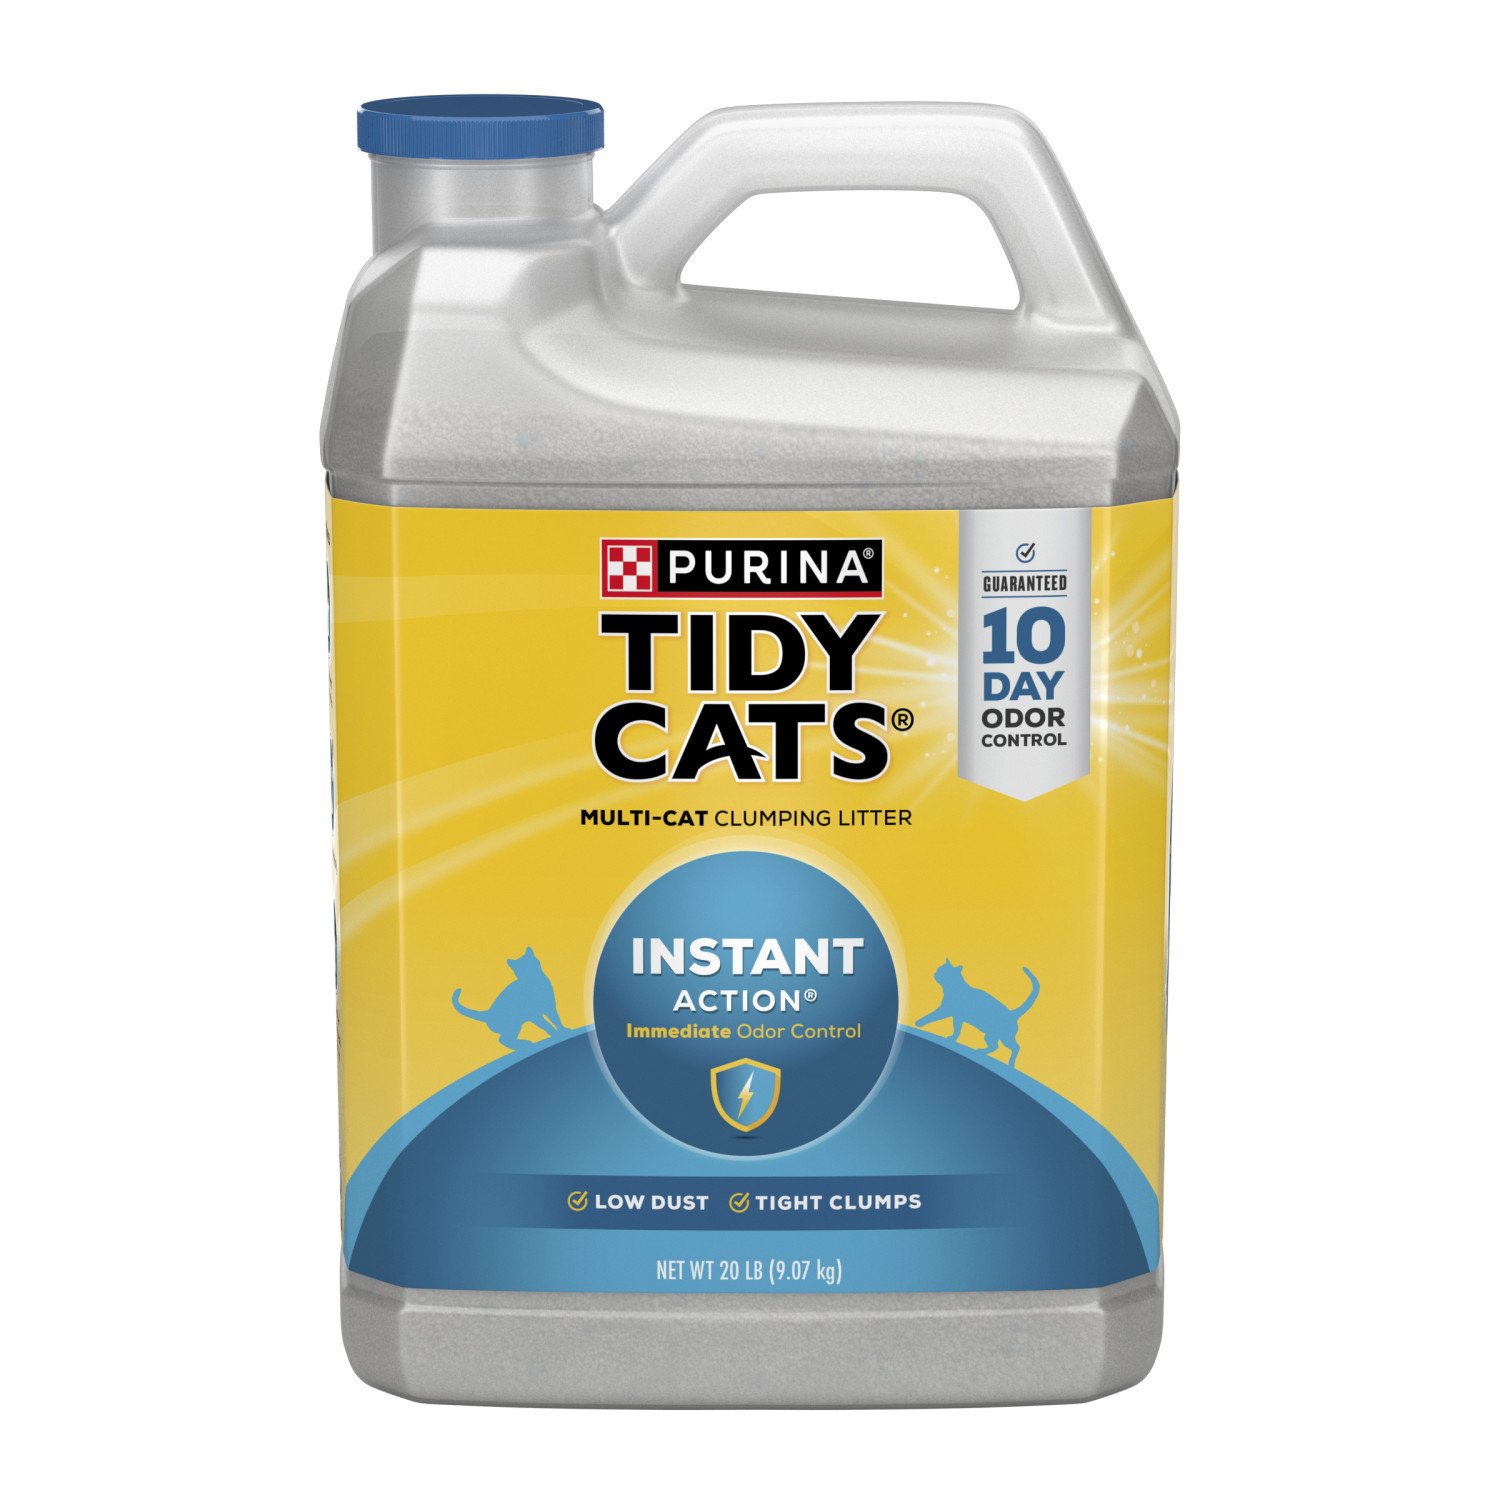 tidy cats instant action cat litter